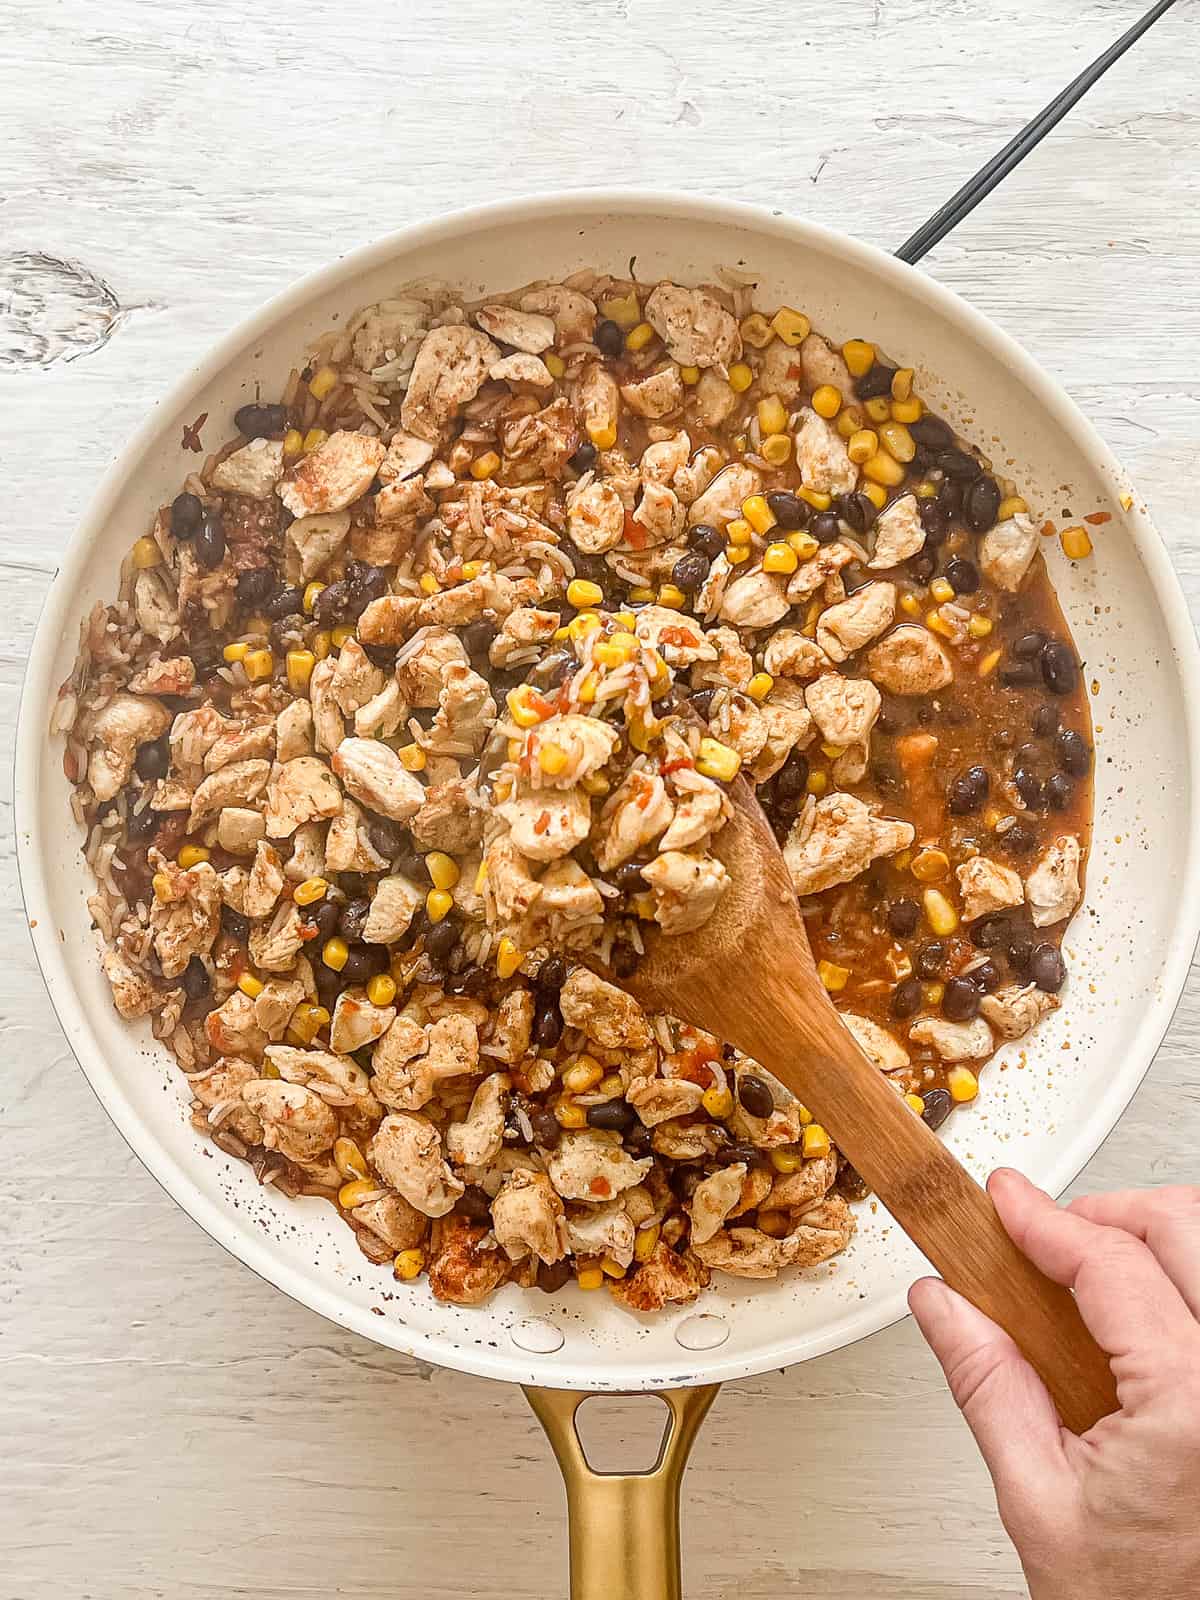 Ingredients (rice, corn, cooked chicken, salsa, black beans and seasonings) being mixed together in a ceramic skillet for Chicken Burritos